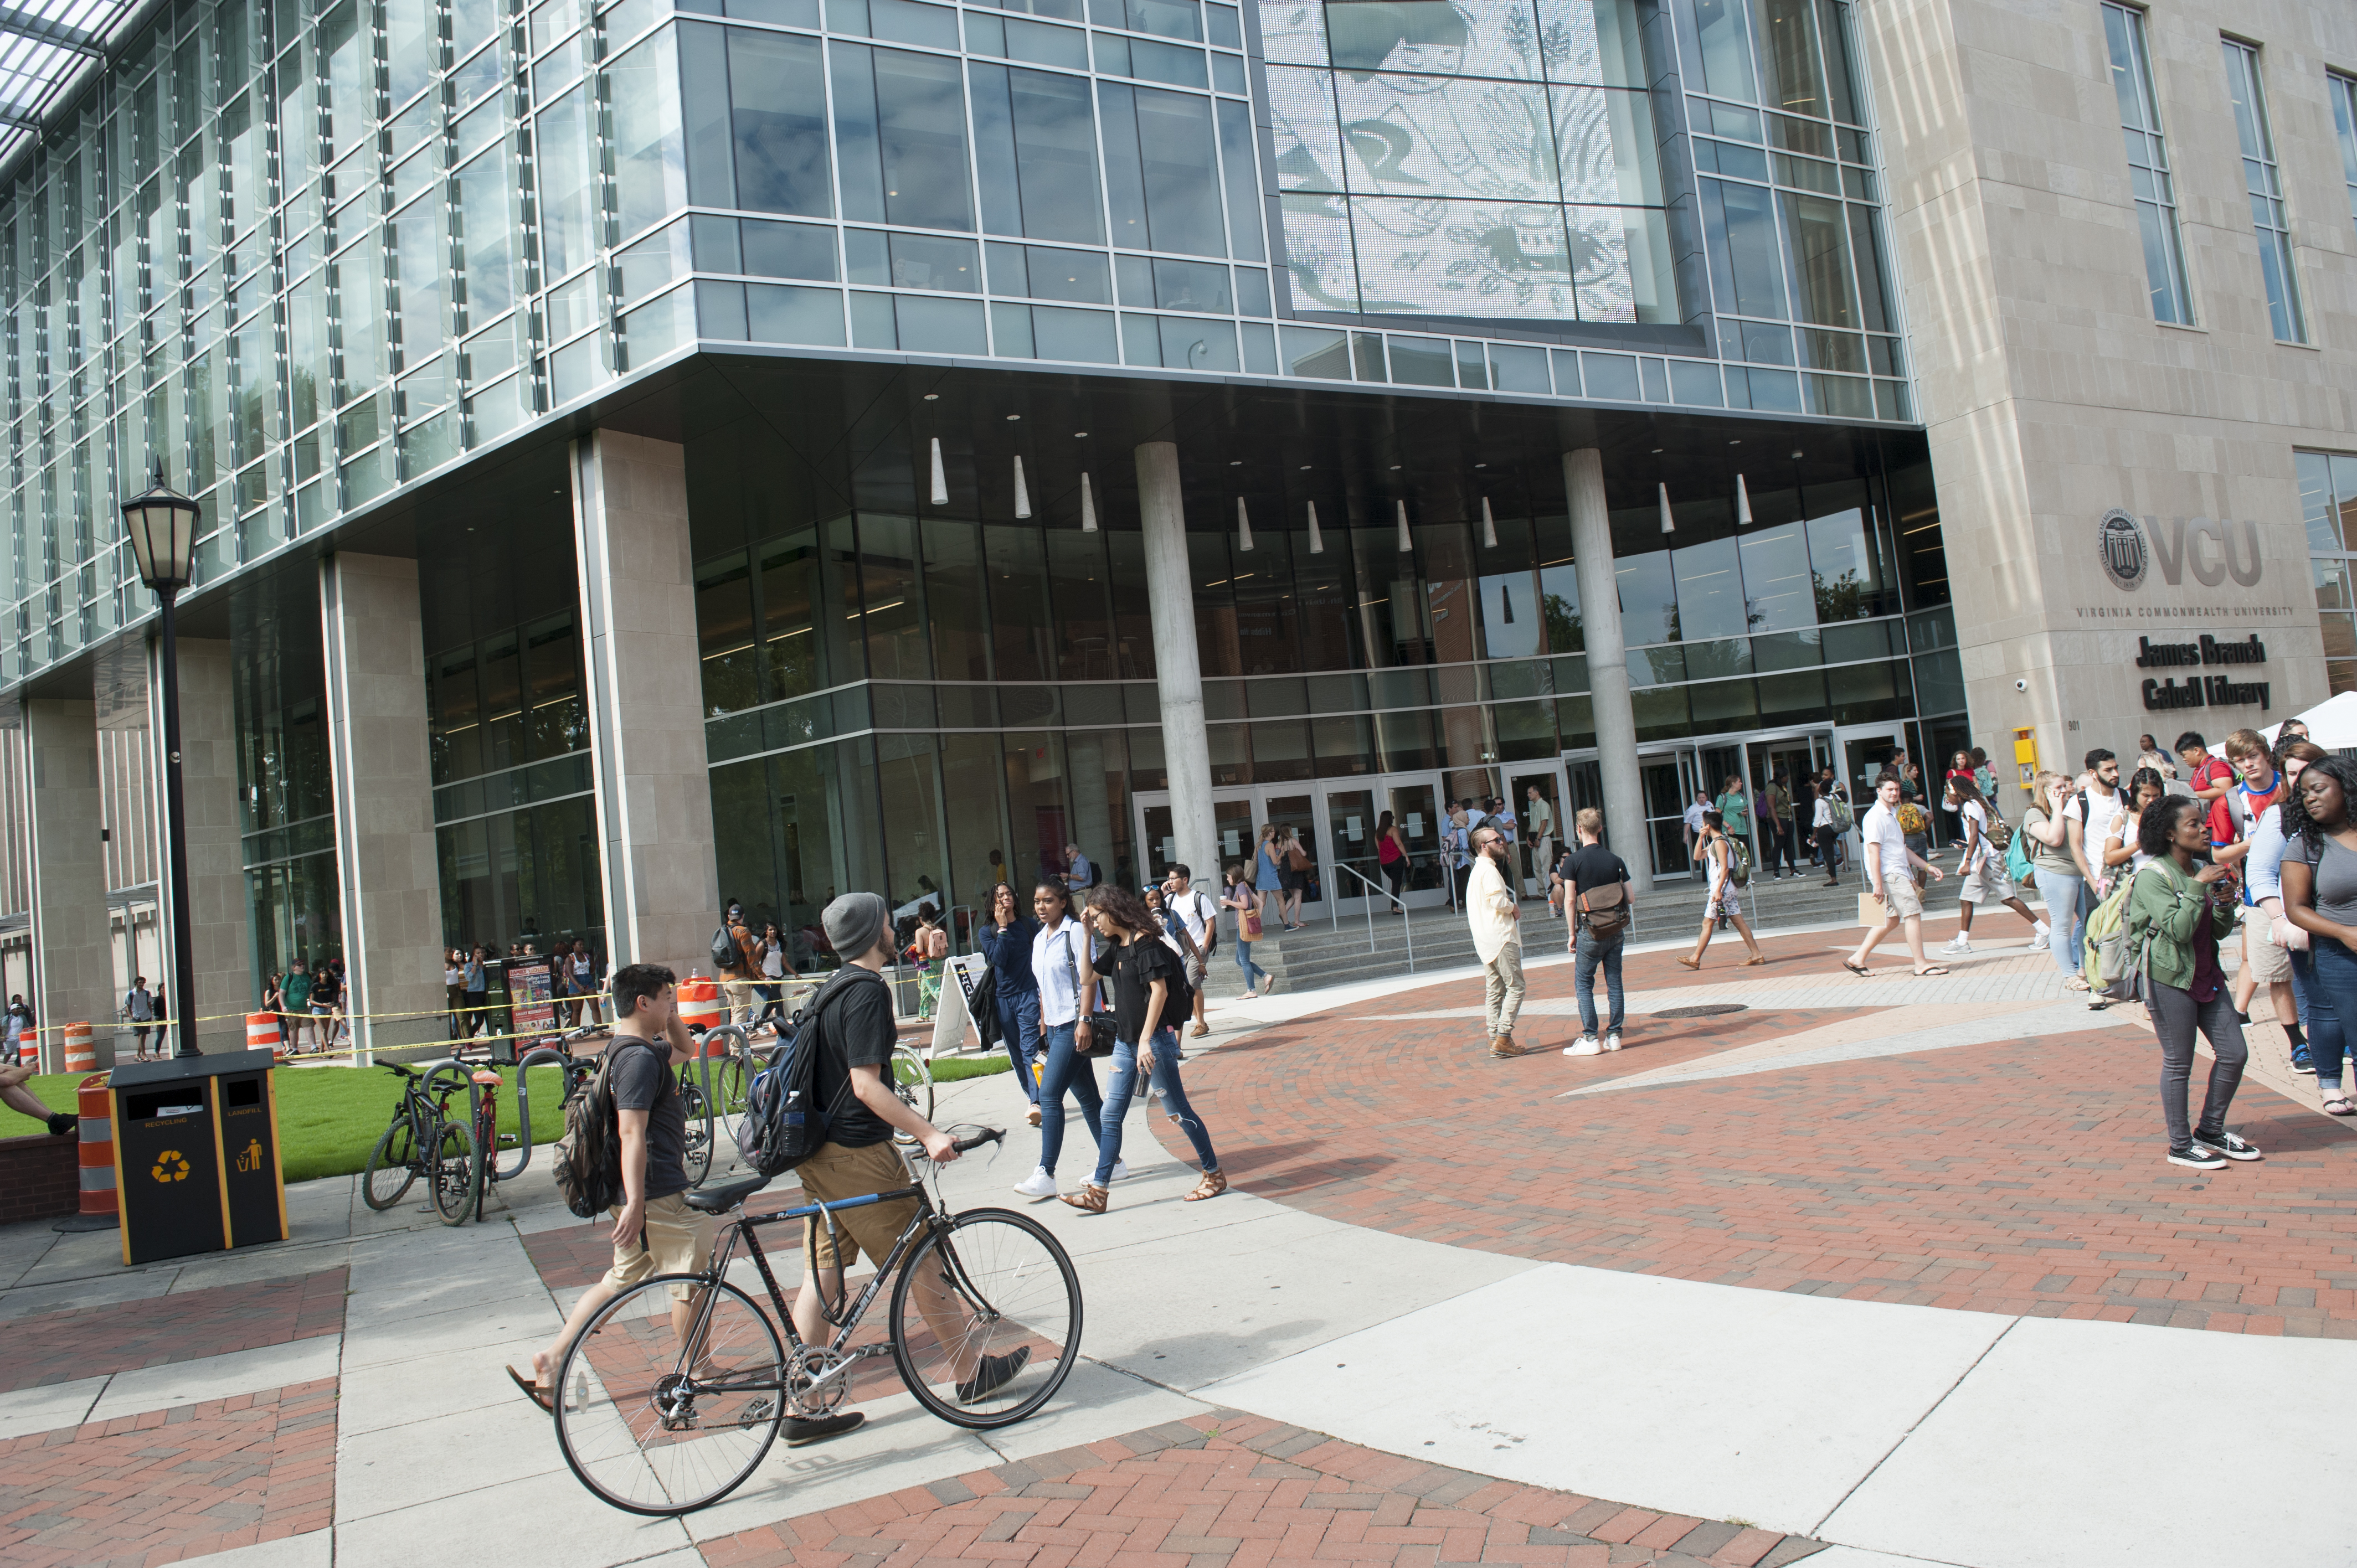 Students are walking, riding bikes and chatting on the first day of class at VCU. Cabell Library is in the background.